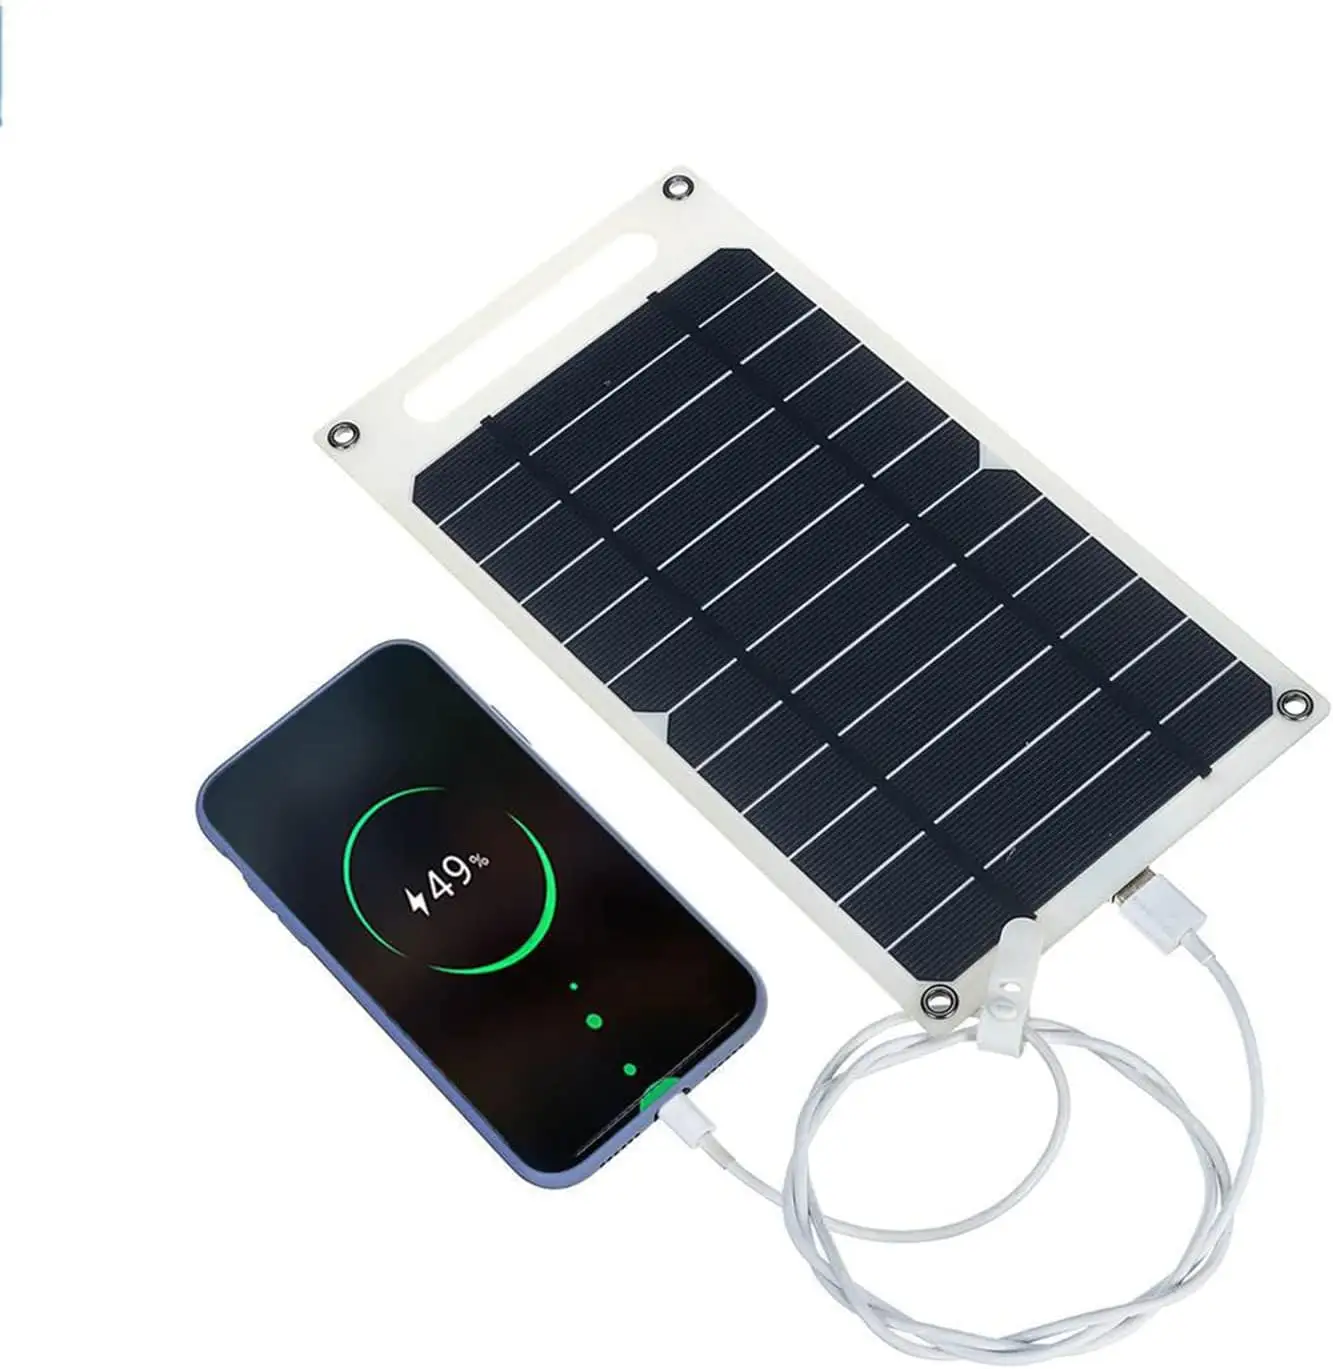 6W Flexible Power Charging Panel USB Interface Mobile Phones Battery Outdoor Hiking Fishing Camping Portable Solar Panel Charger